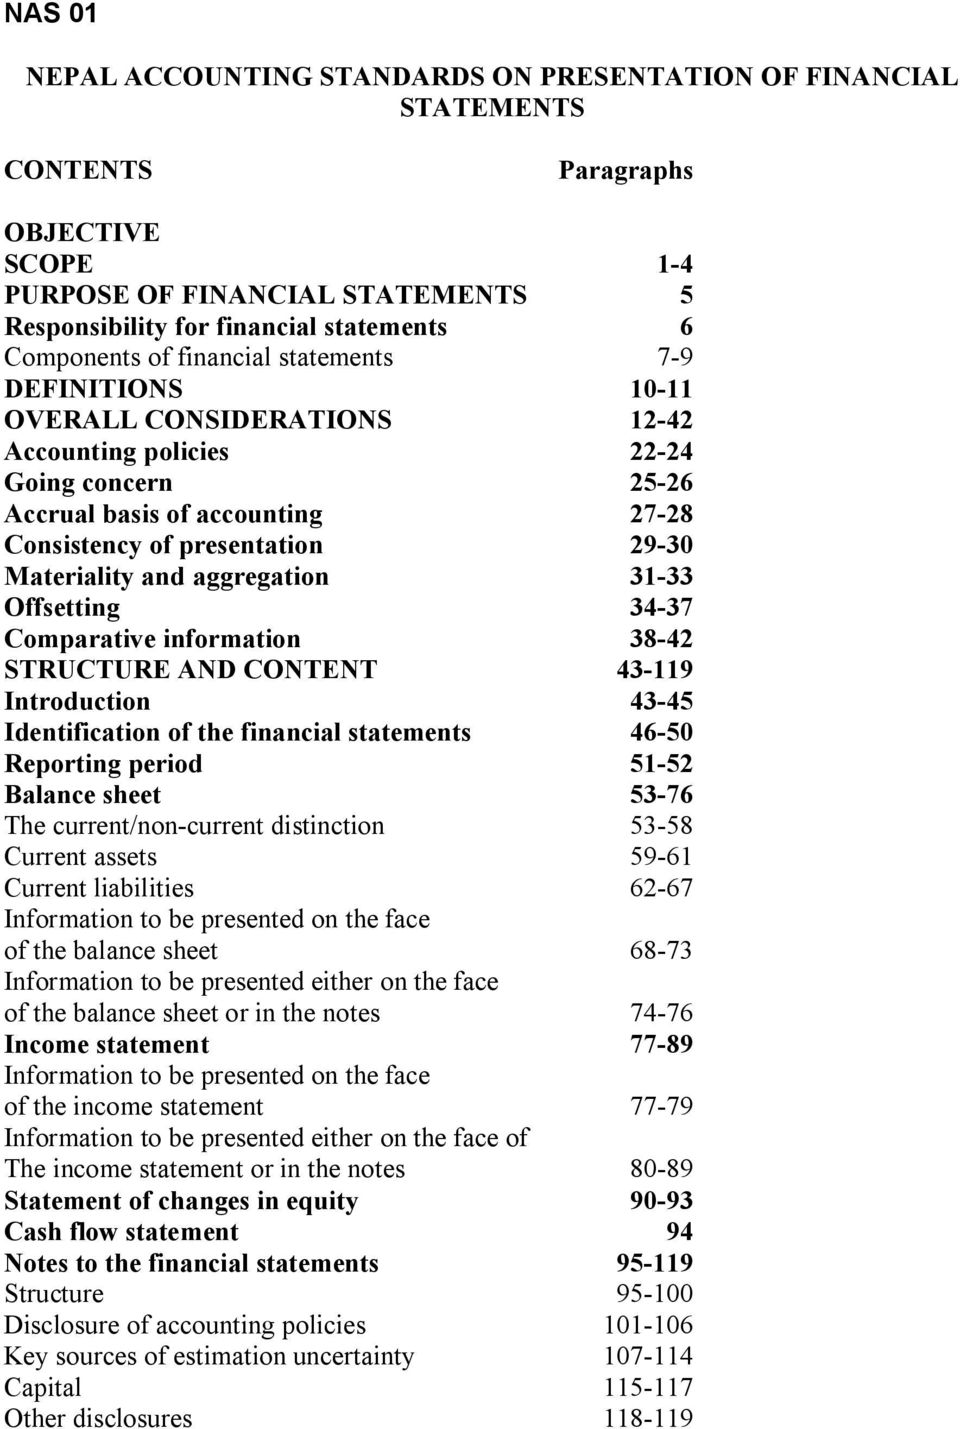 Materiality and aggregation 31-33 Offsetting 34-37 Comparative information 38-42 STRUCTURE AND CONTENT 43-119 Introduction 43-45 Identification of the financial statements 46-50 Reporting period